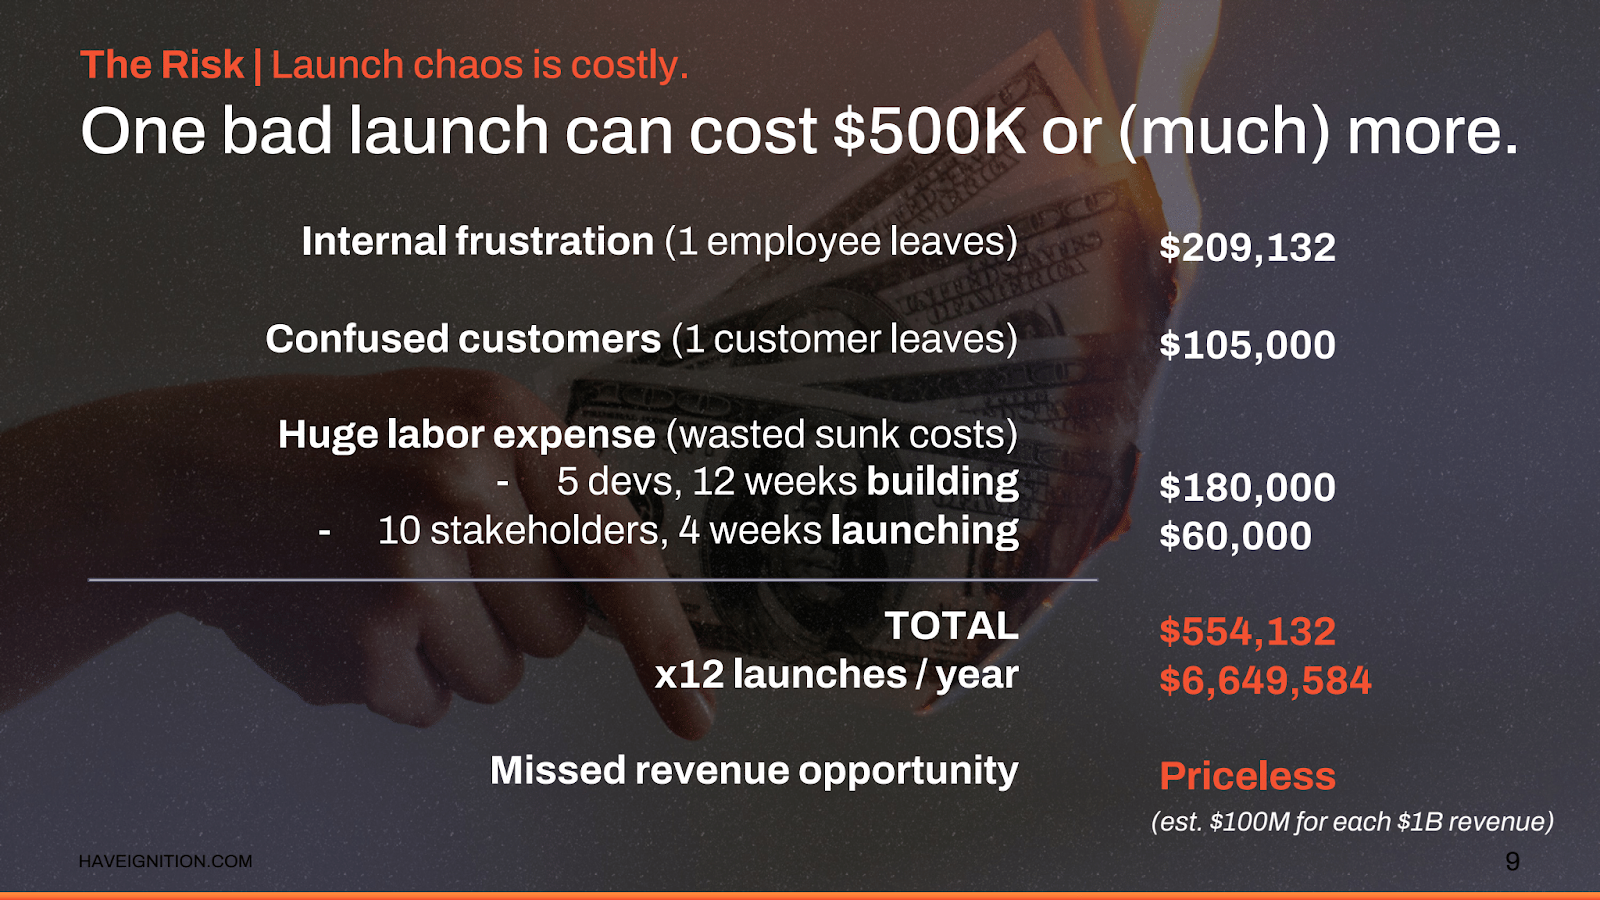 Breakdown of the cost of a bad launch